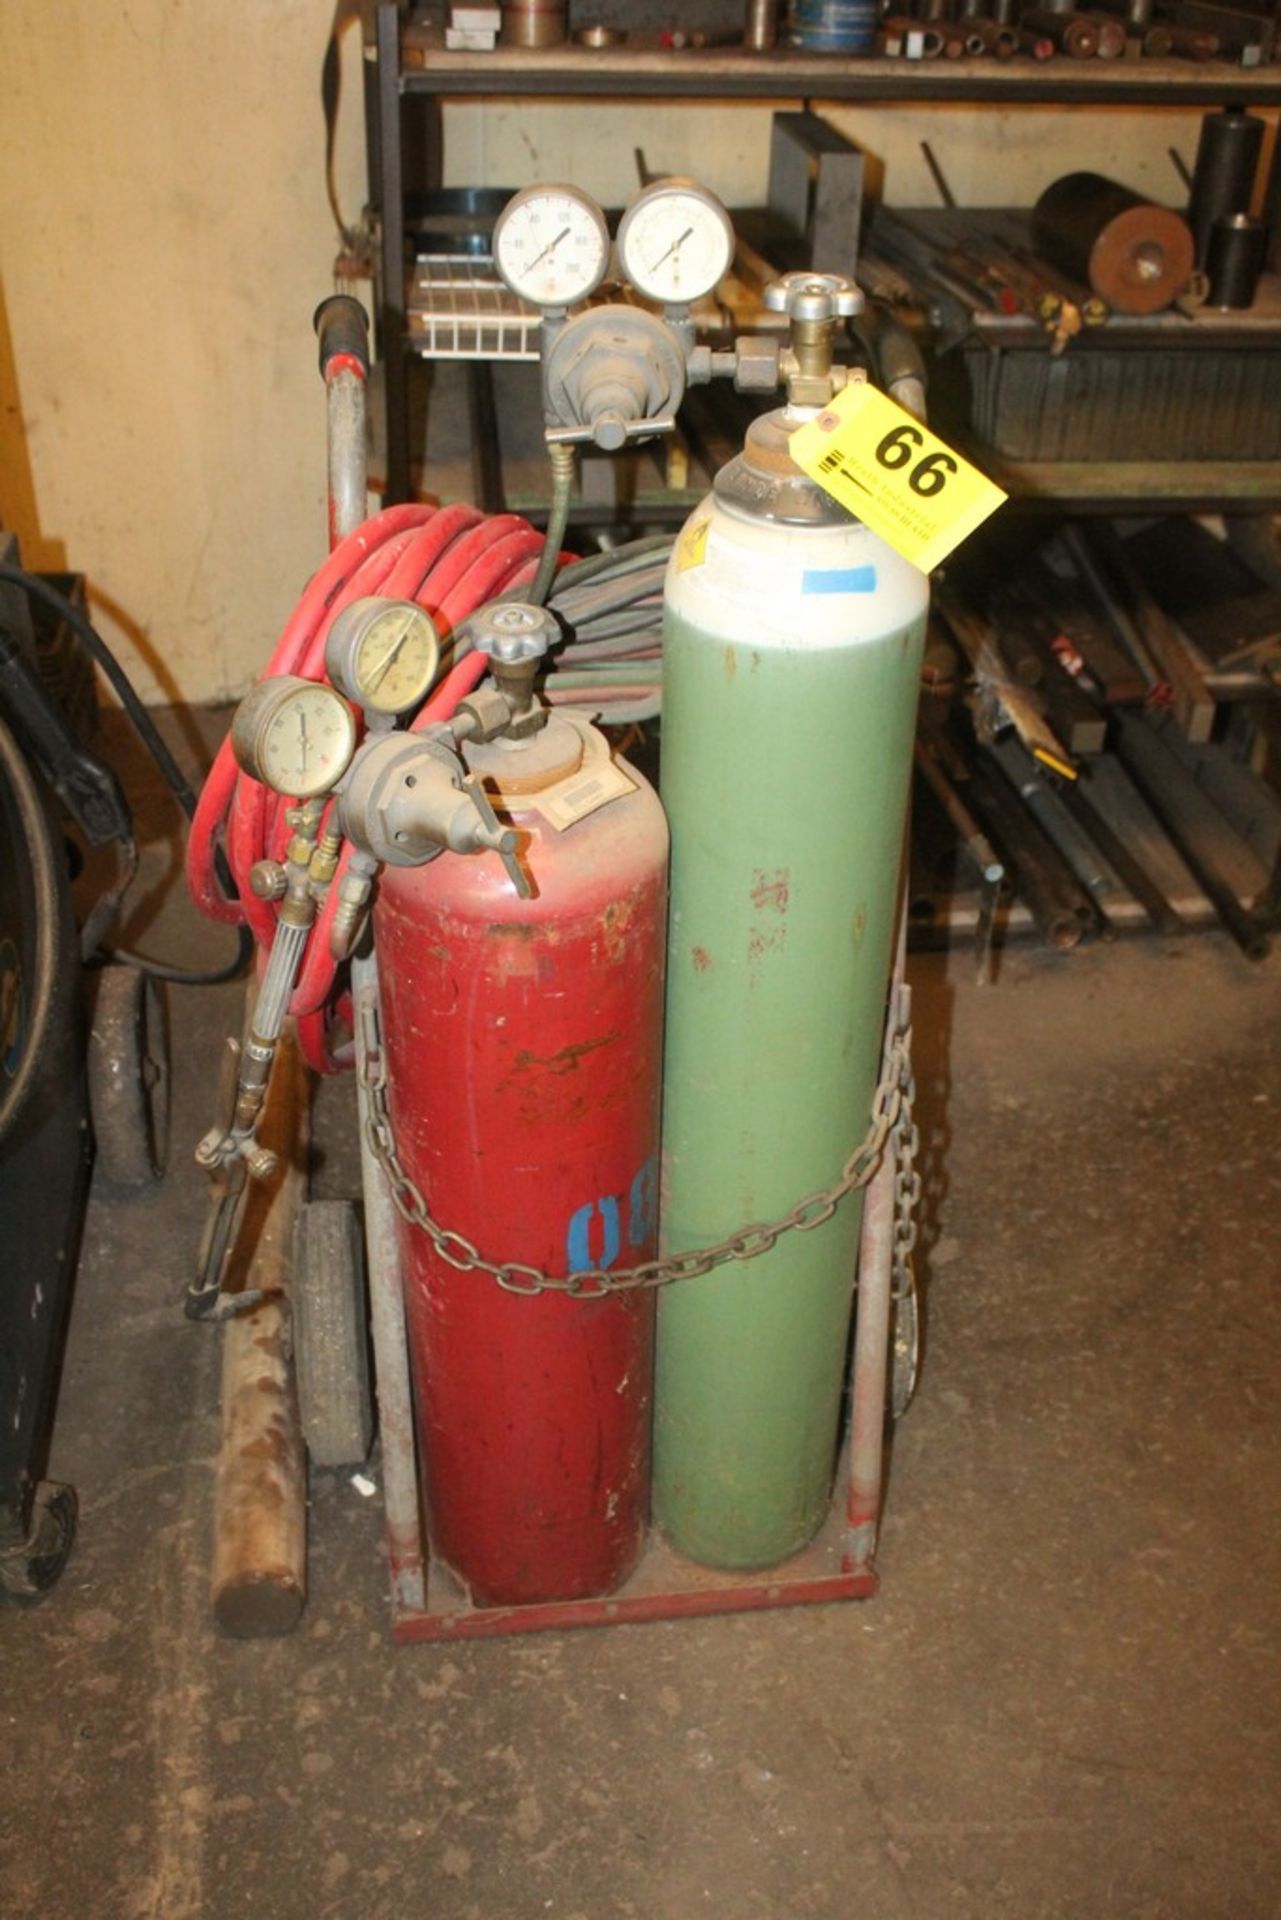 PORTABLE WELDING CART WITH TANKS, GAUGES, HOSES & TORCH